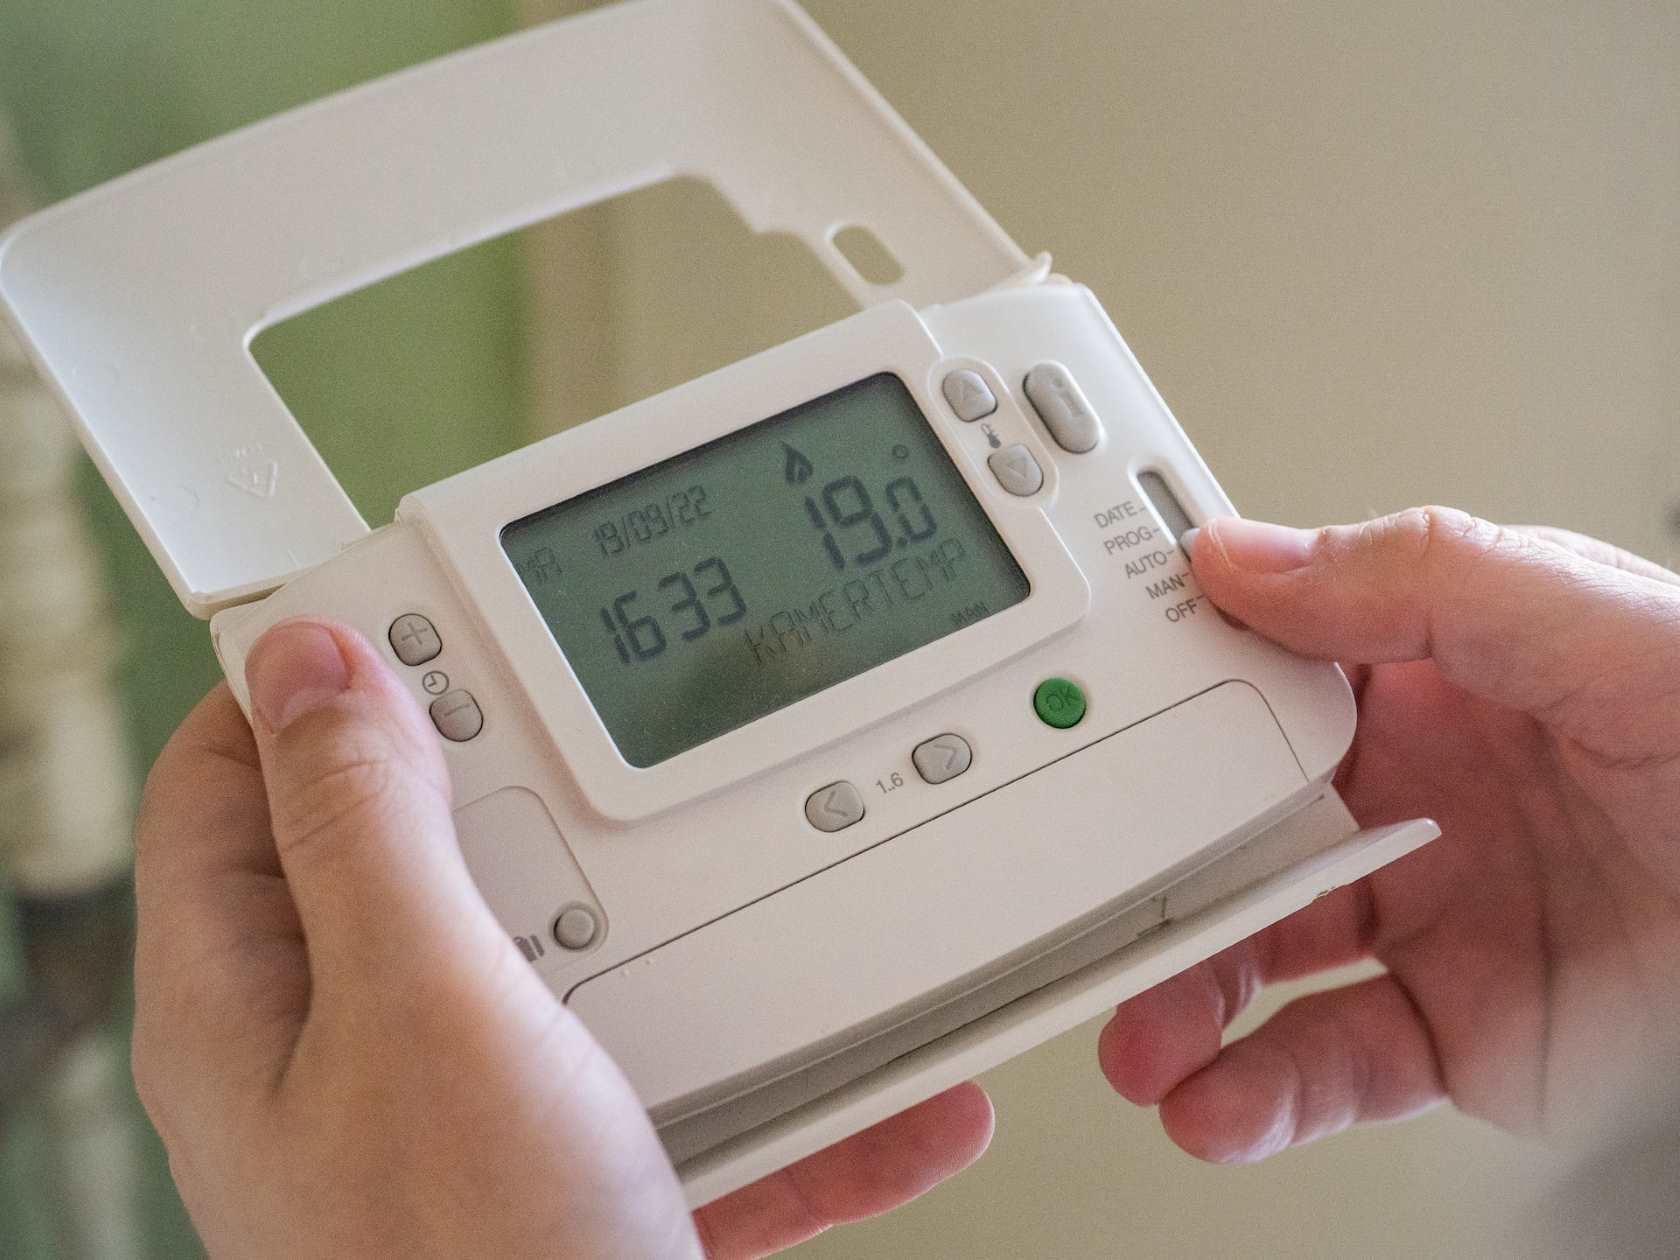 White remote controller for a heat pump being held by two hands